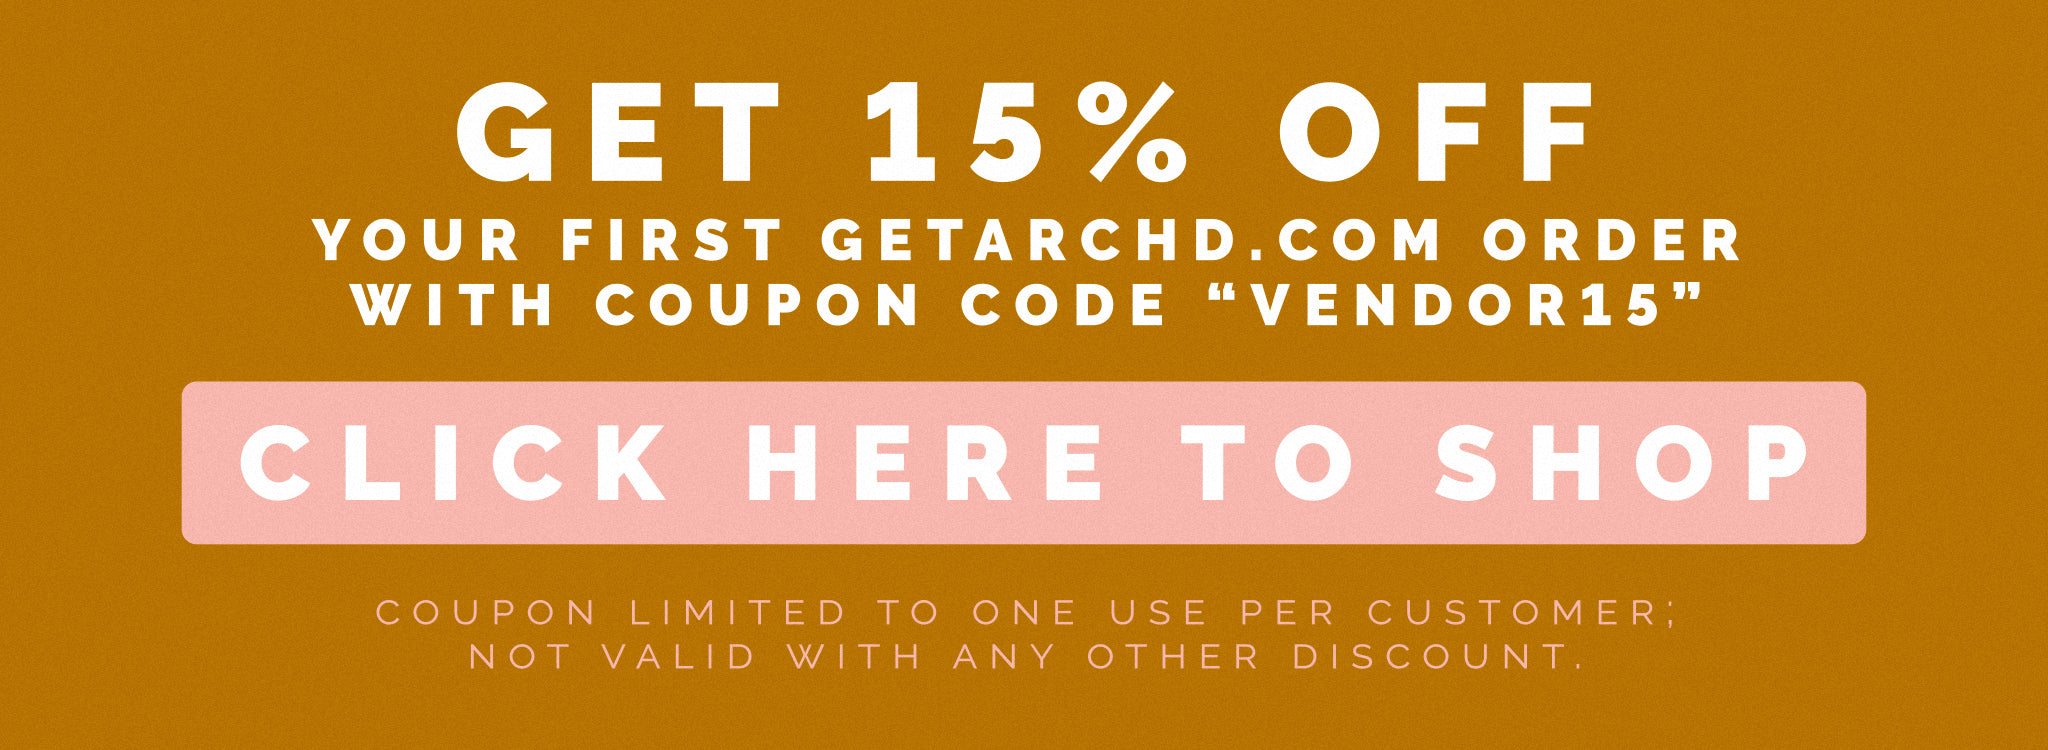 Shop ARCHd and get 15% off first order with coupon code